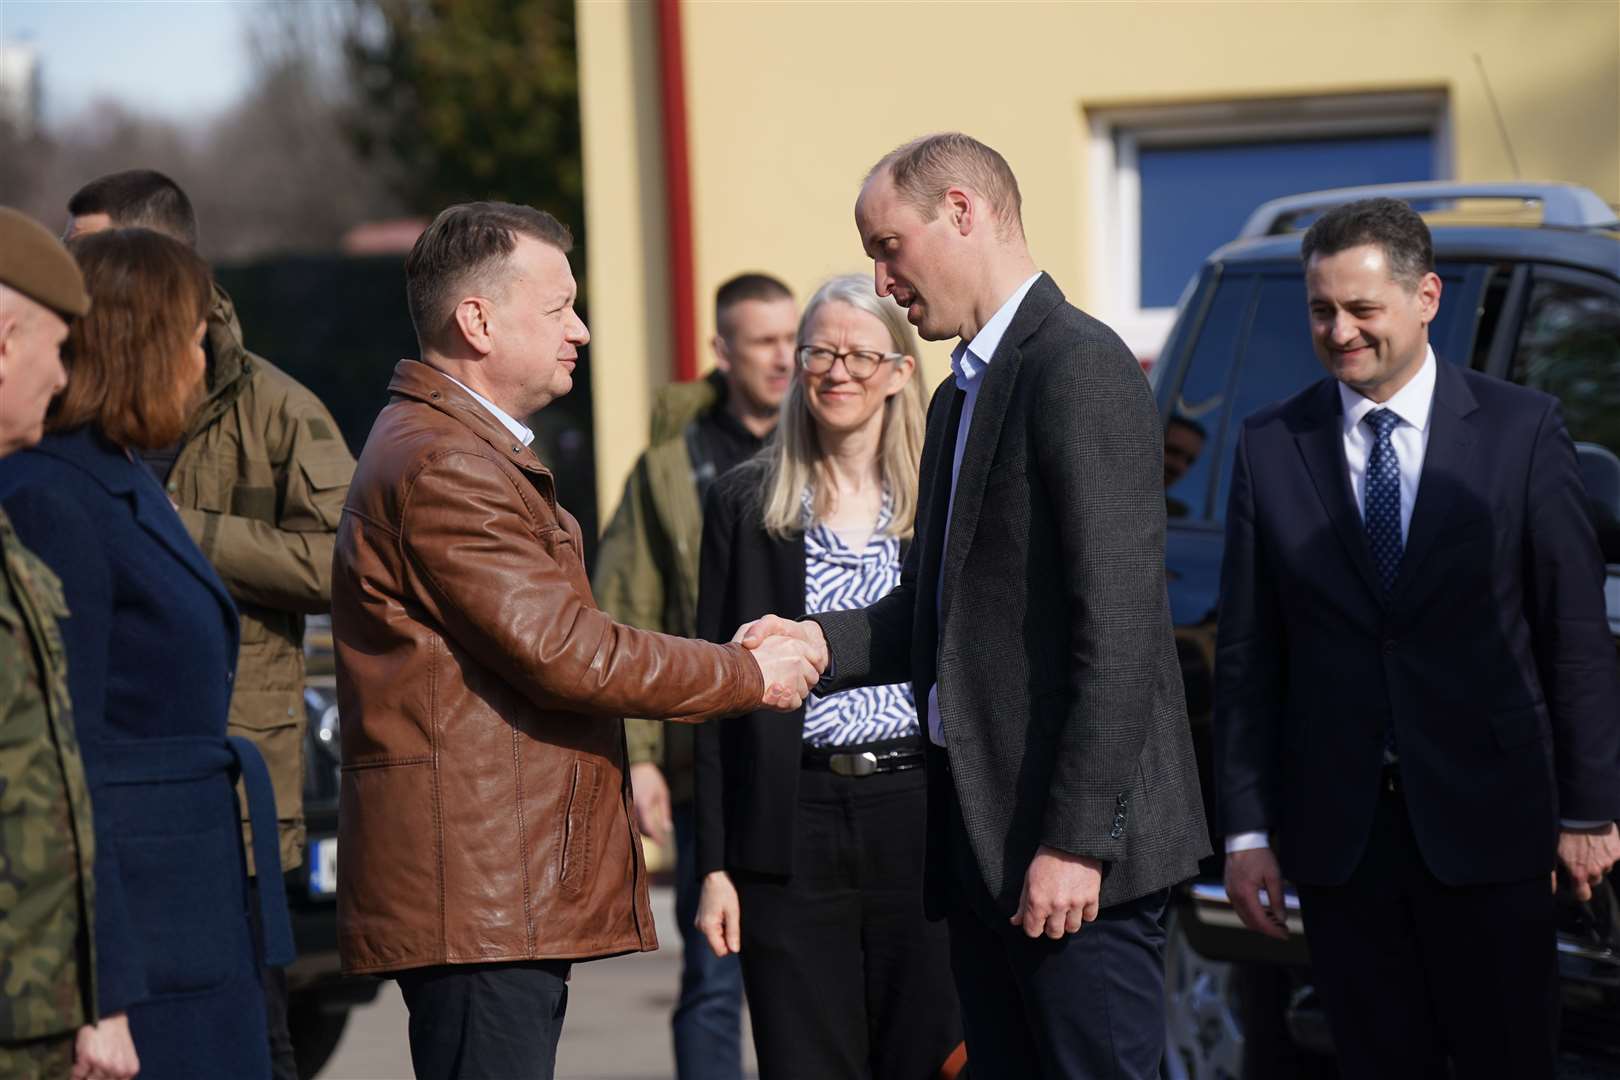 The Prince of Wales is greeted by Polish deputy prime minister and minister of national defence Mariusz Blaszczak as he arrives for a visit to the 3rd Brigade Territorial Defence Force base in Rzeszow, Poland (Yui Mok/PA)